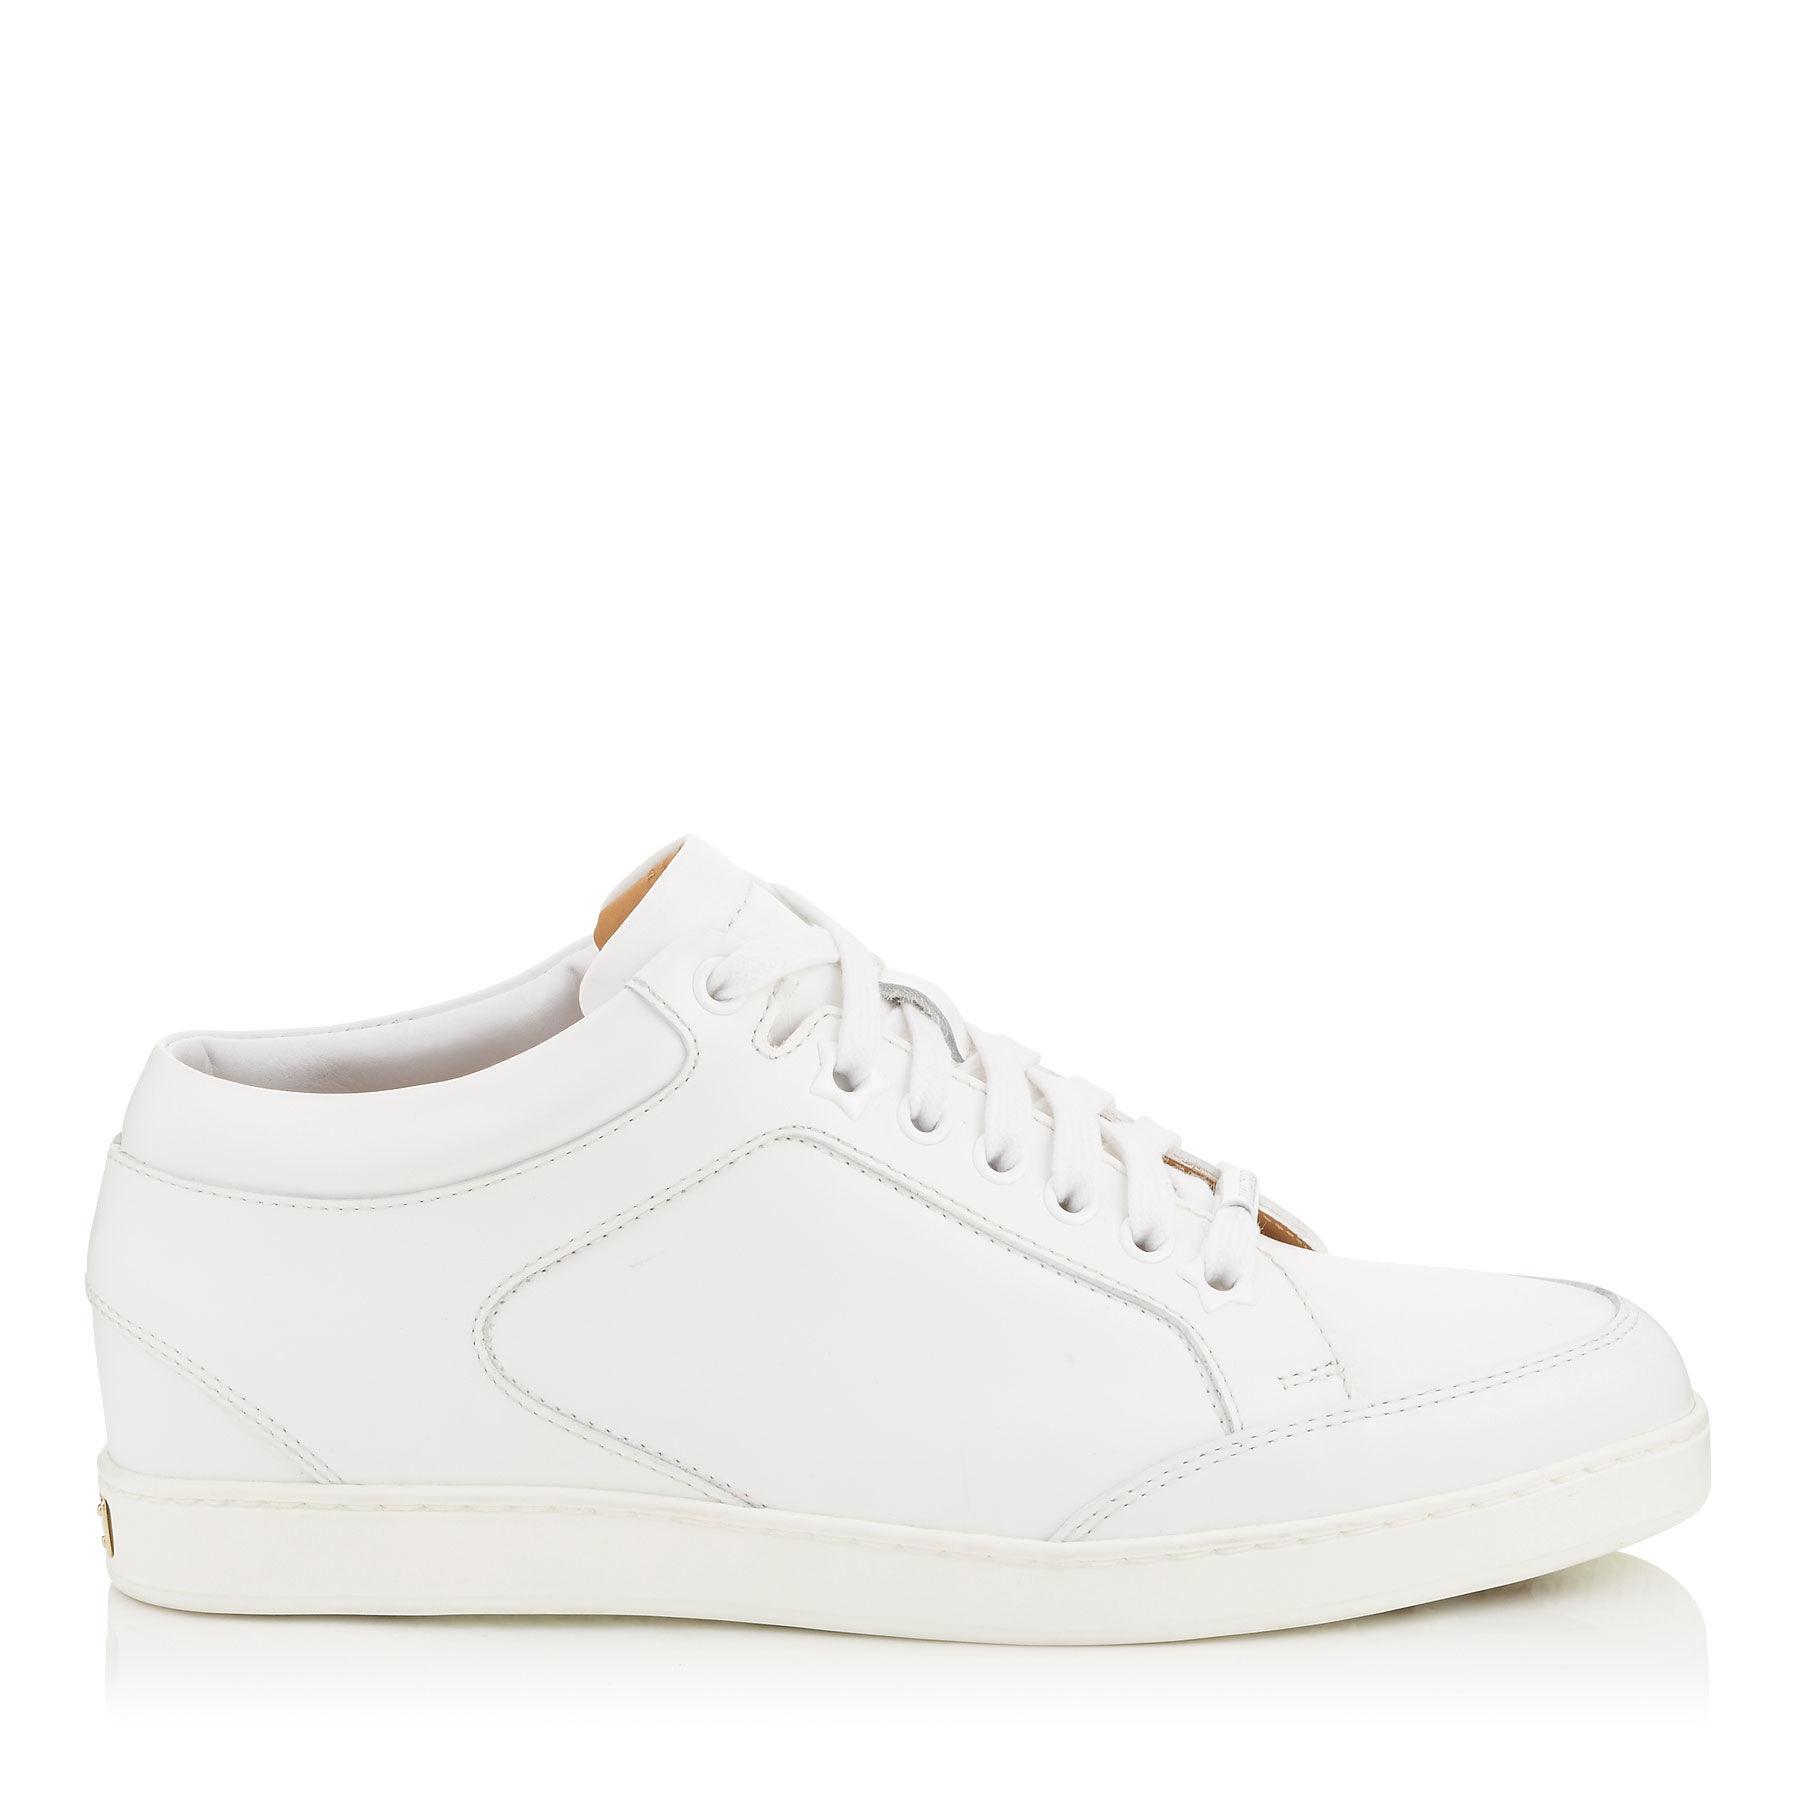 Jimmy choo Miami White Calf Leather Low Top Trainers in White | Lyst